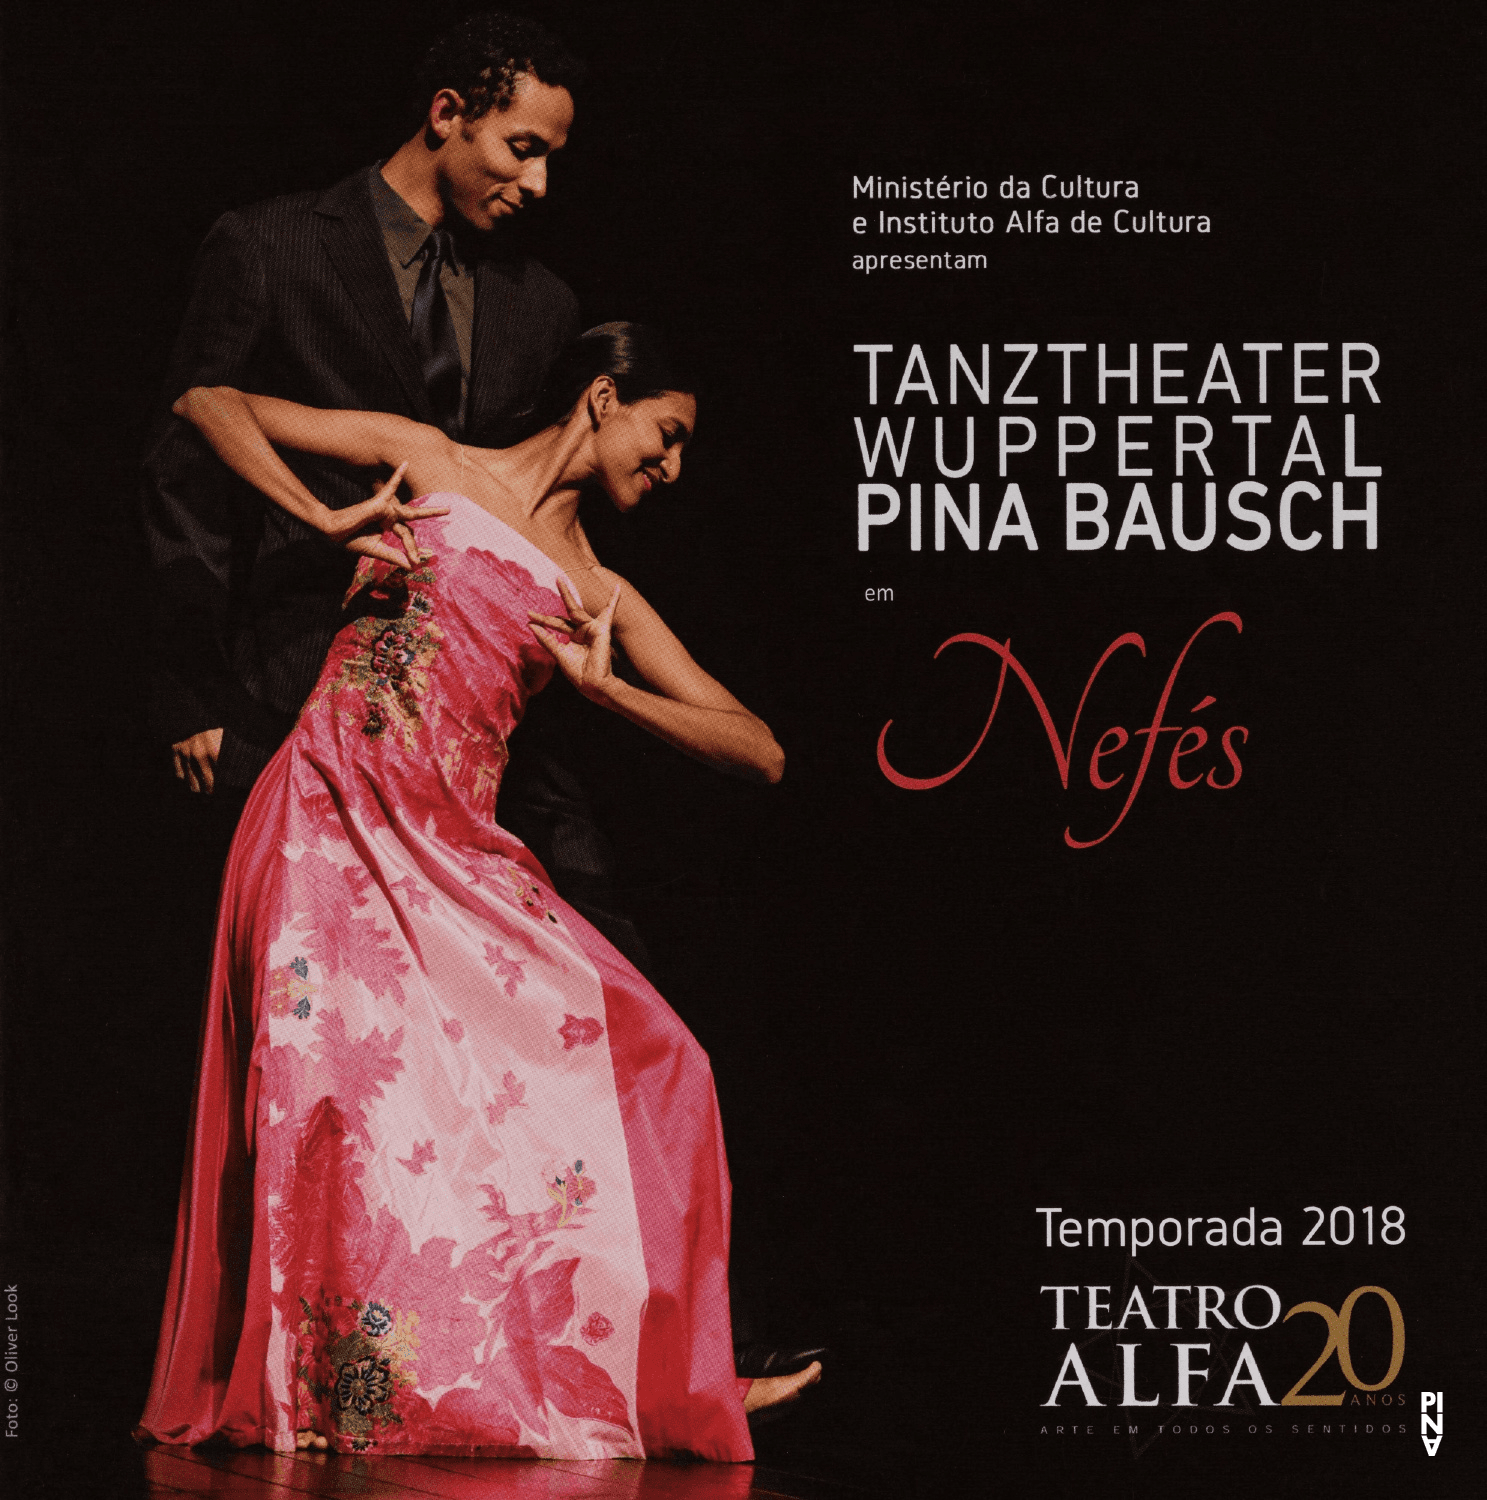 Booklet for “Nefés” by Pina Bausch with Tanztheater Wuppertal in in São Paulo, 11/29/2018 – 12/02/2018